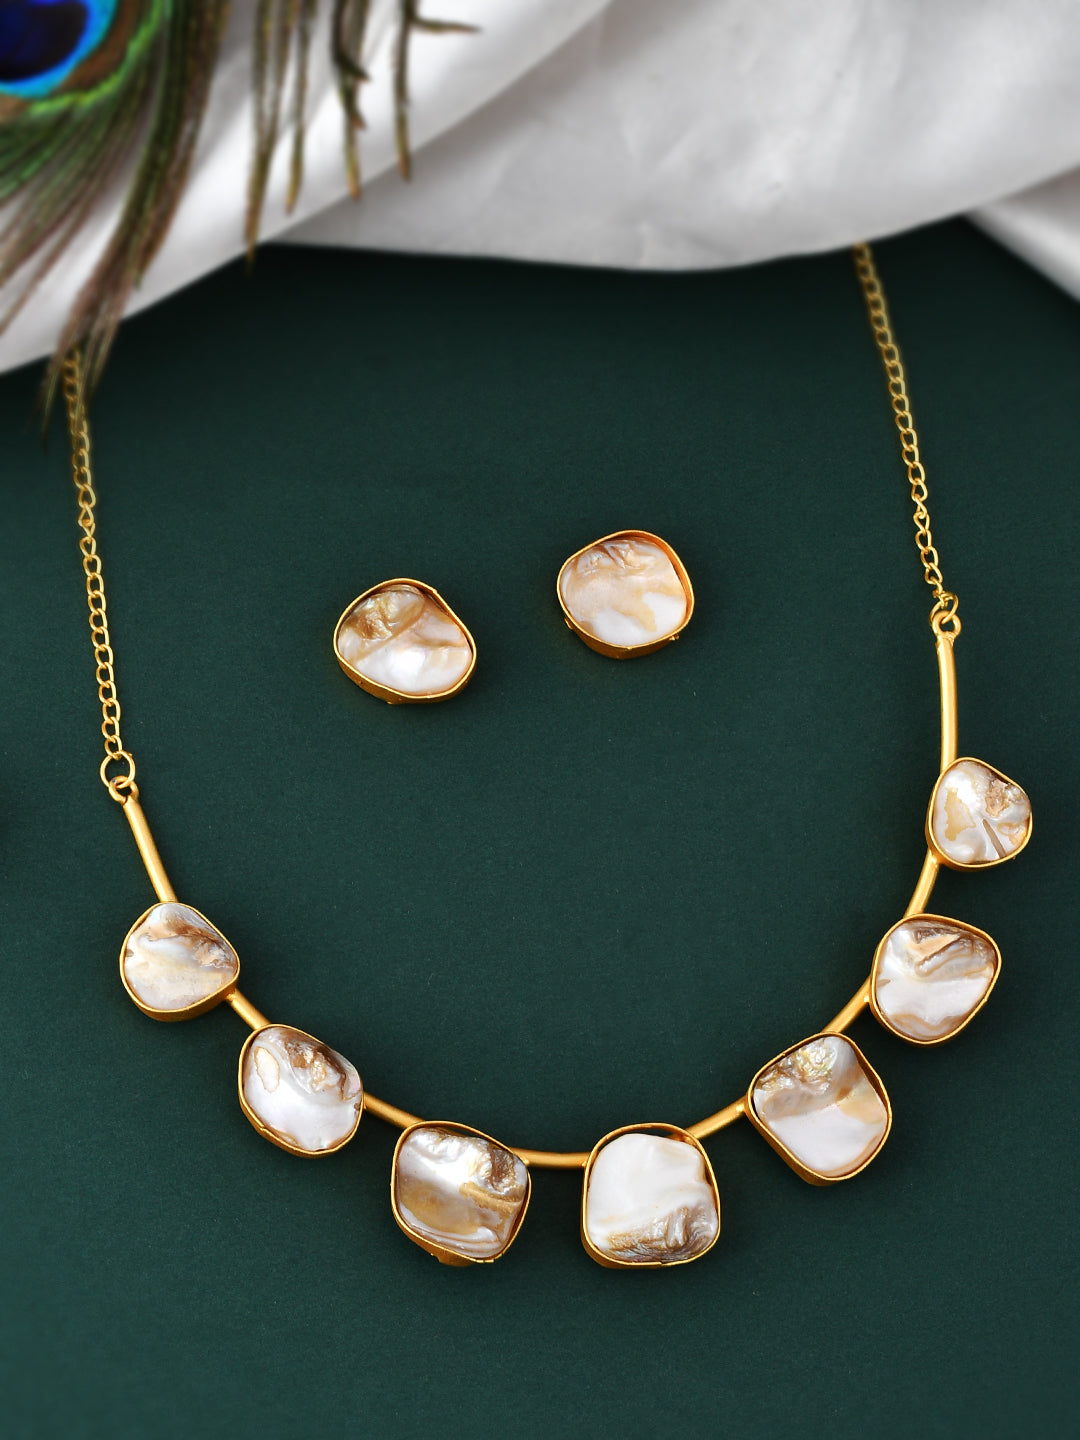 Gold Plated Western Necklace with earrings